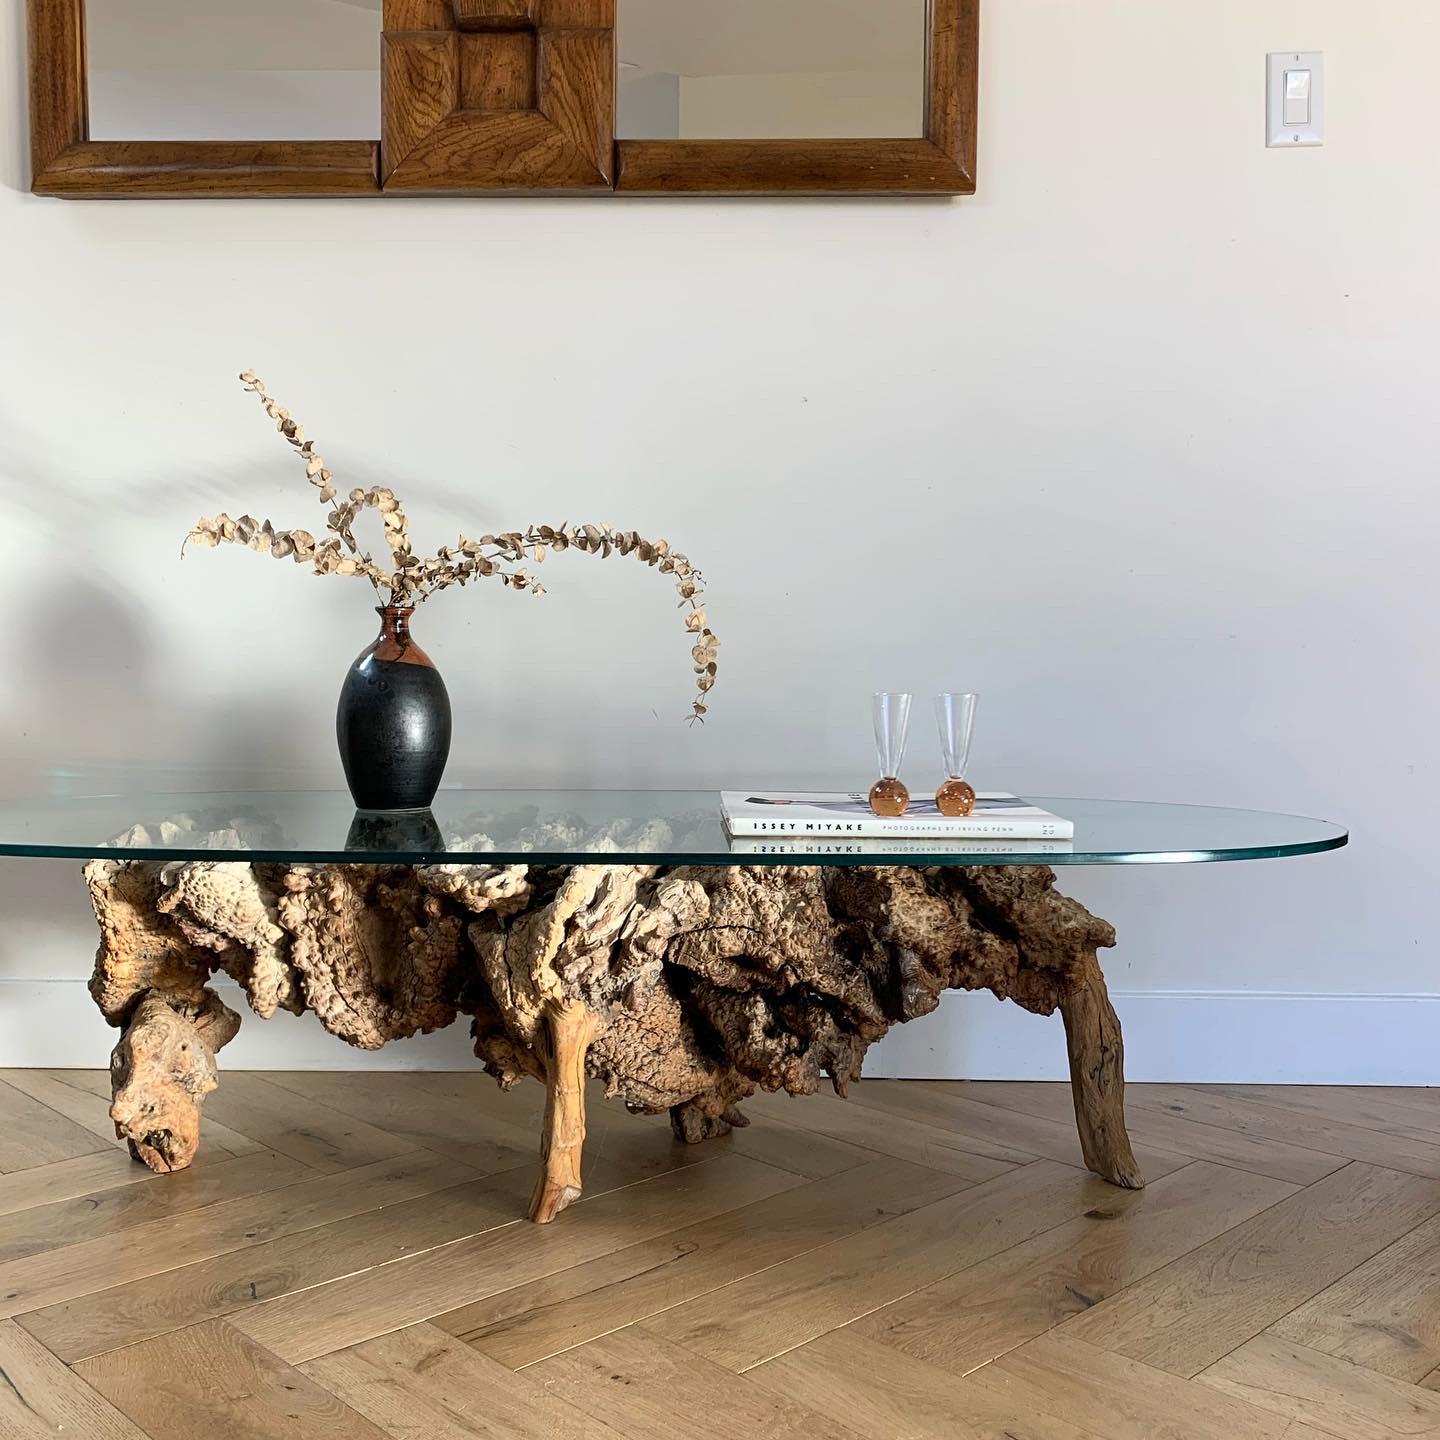 1970s raw root wood coffee table with oval glass. Narrow, elegant, organic. Minor signs of age on glass upon close inspection (shown in pics), but overall great condition. 
Measures: 59” W x 23.25” D x 15” H.